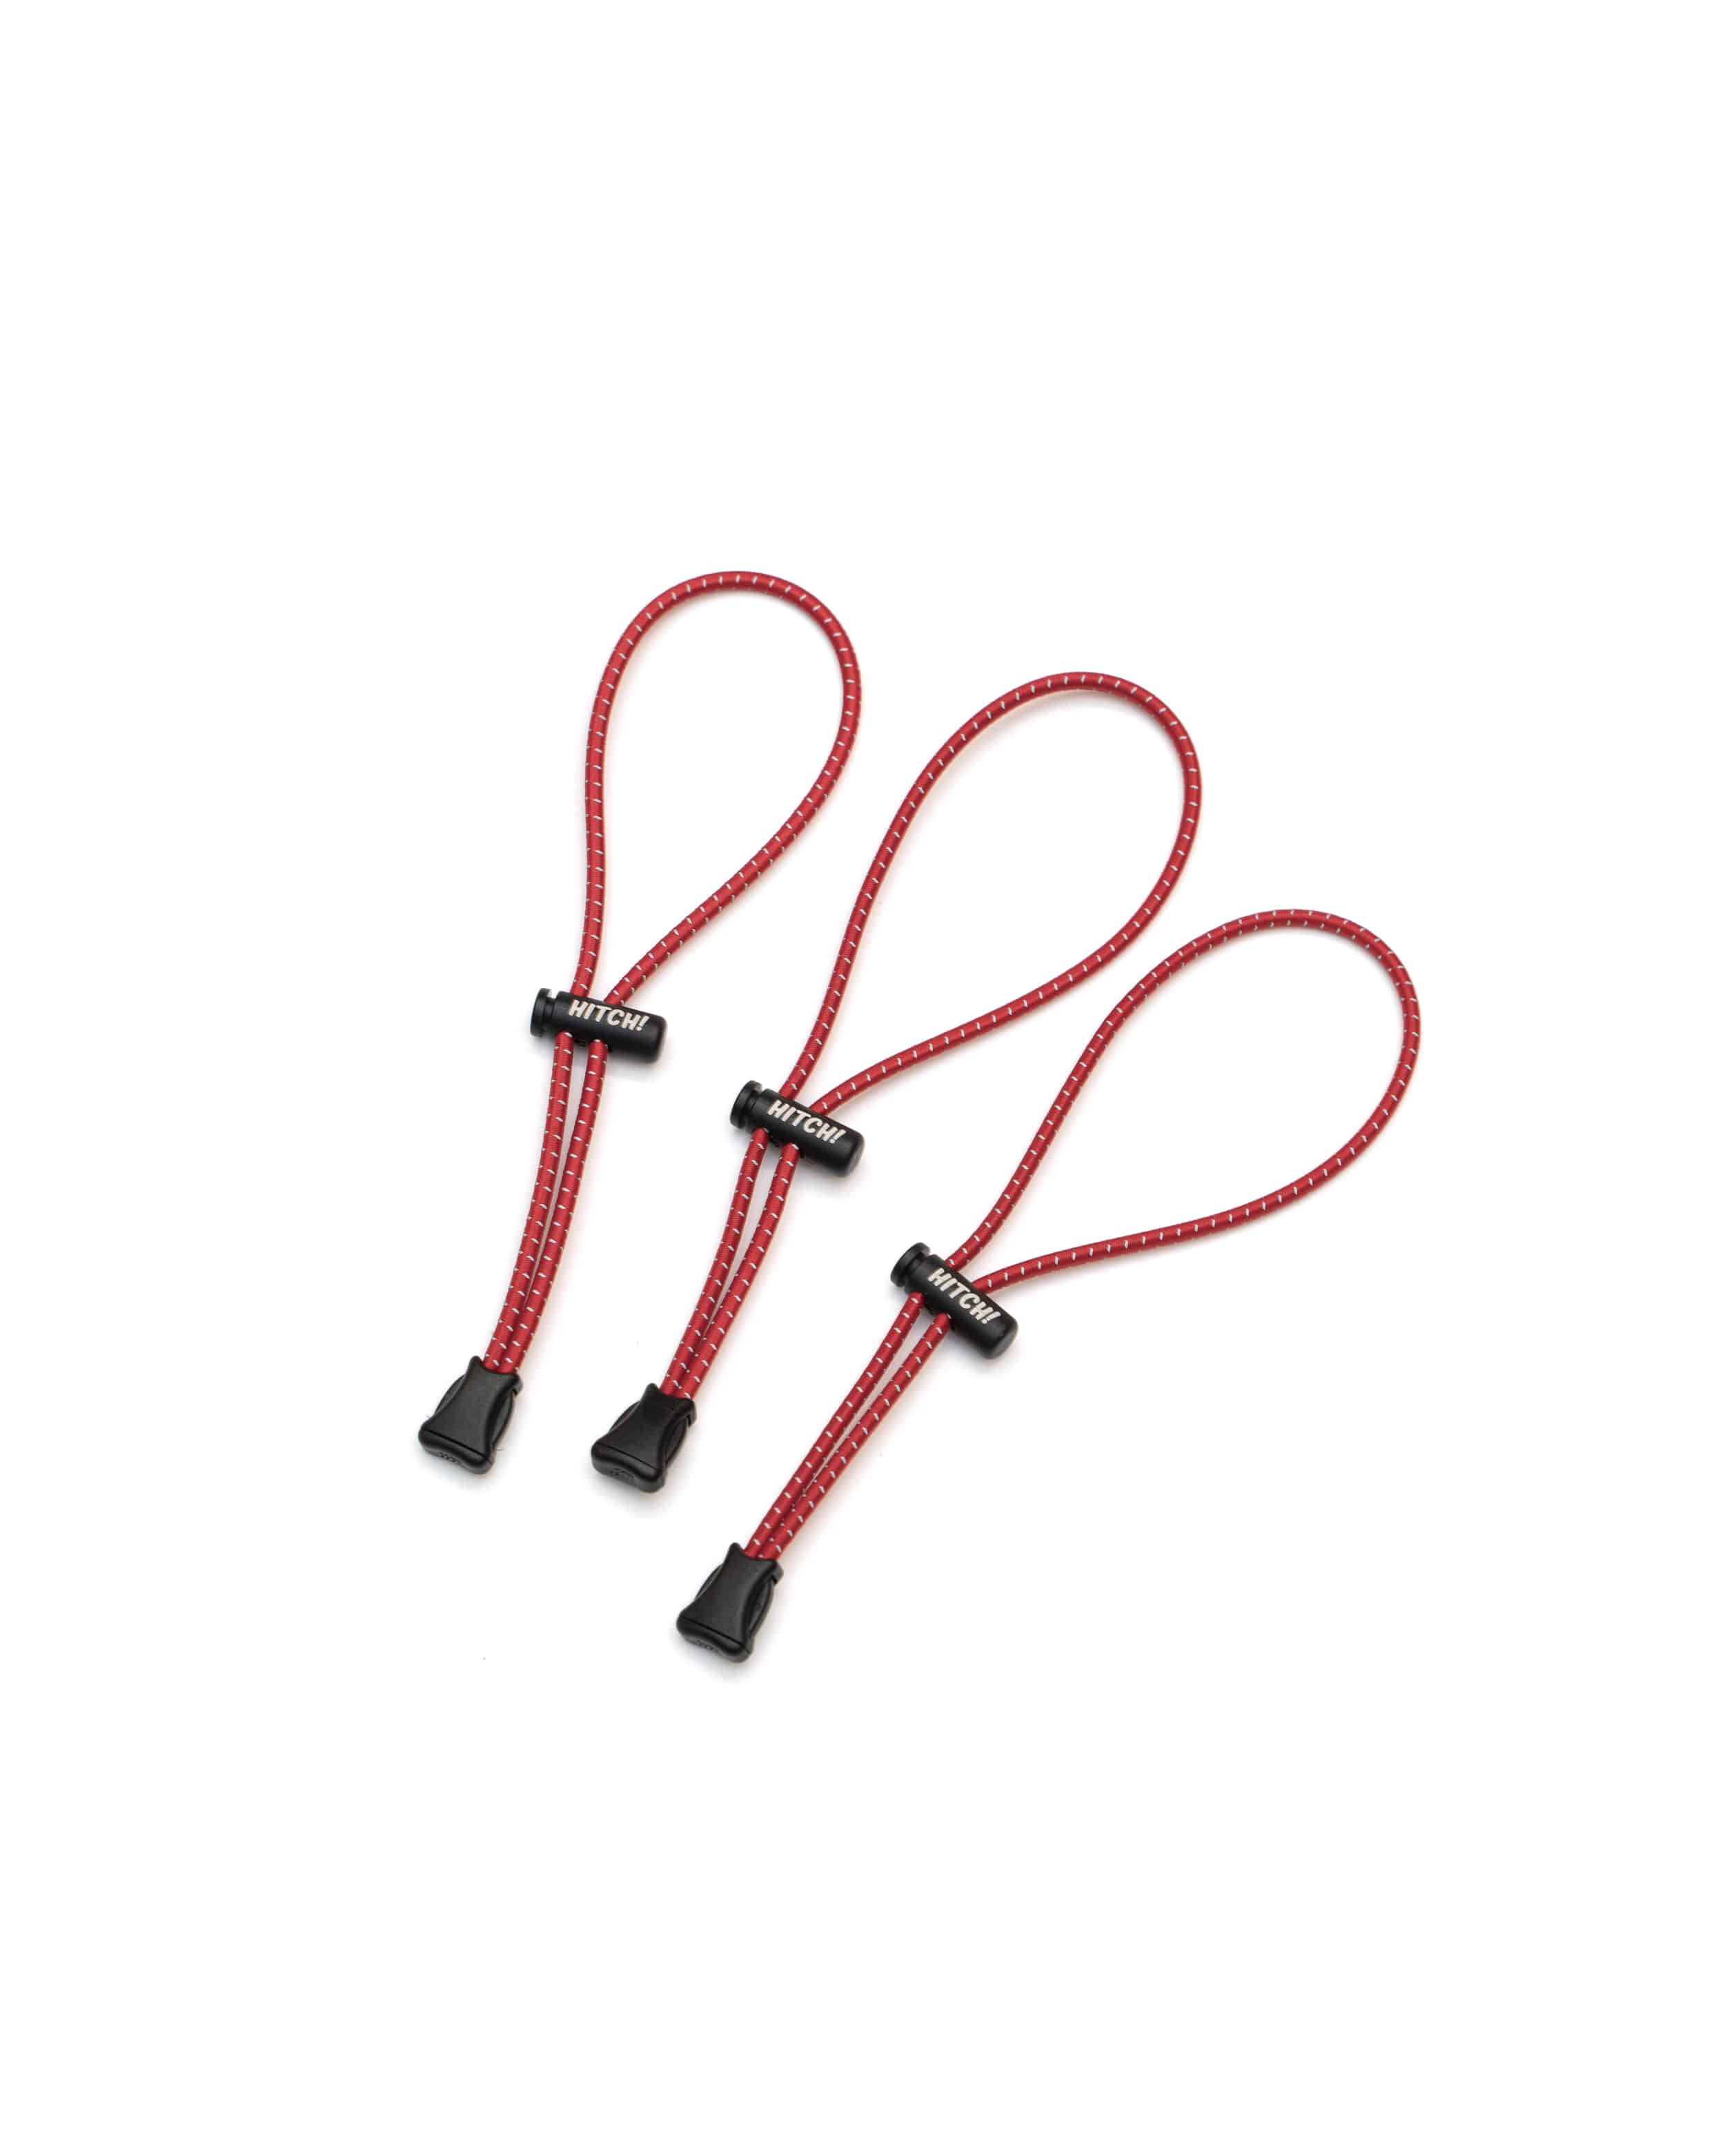 Hitch elastic strap - Red(Reflective)